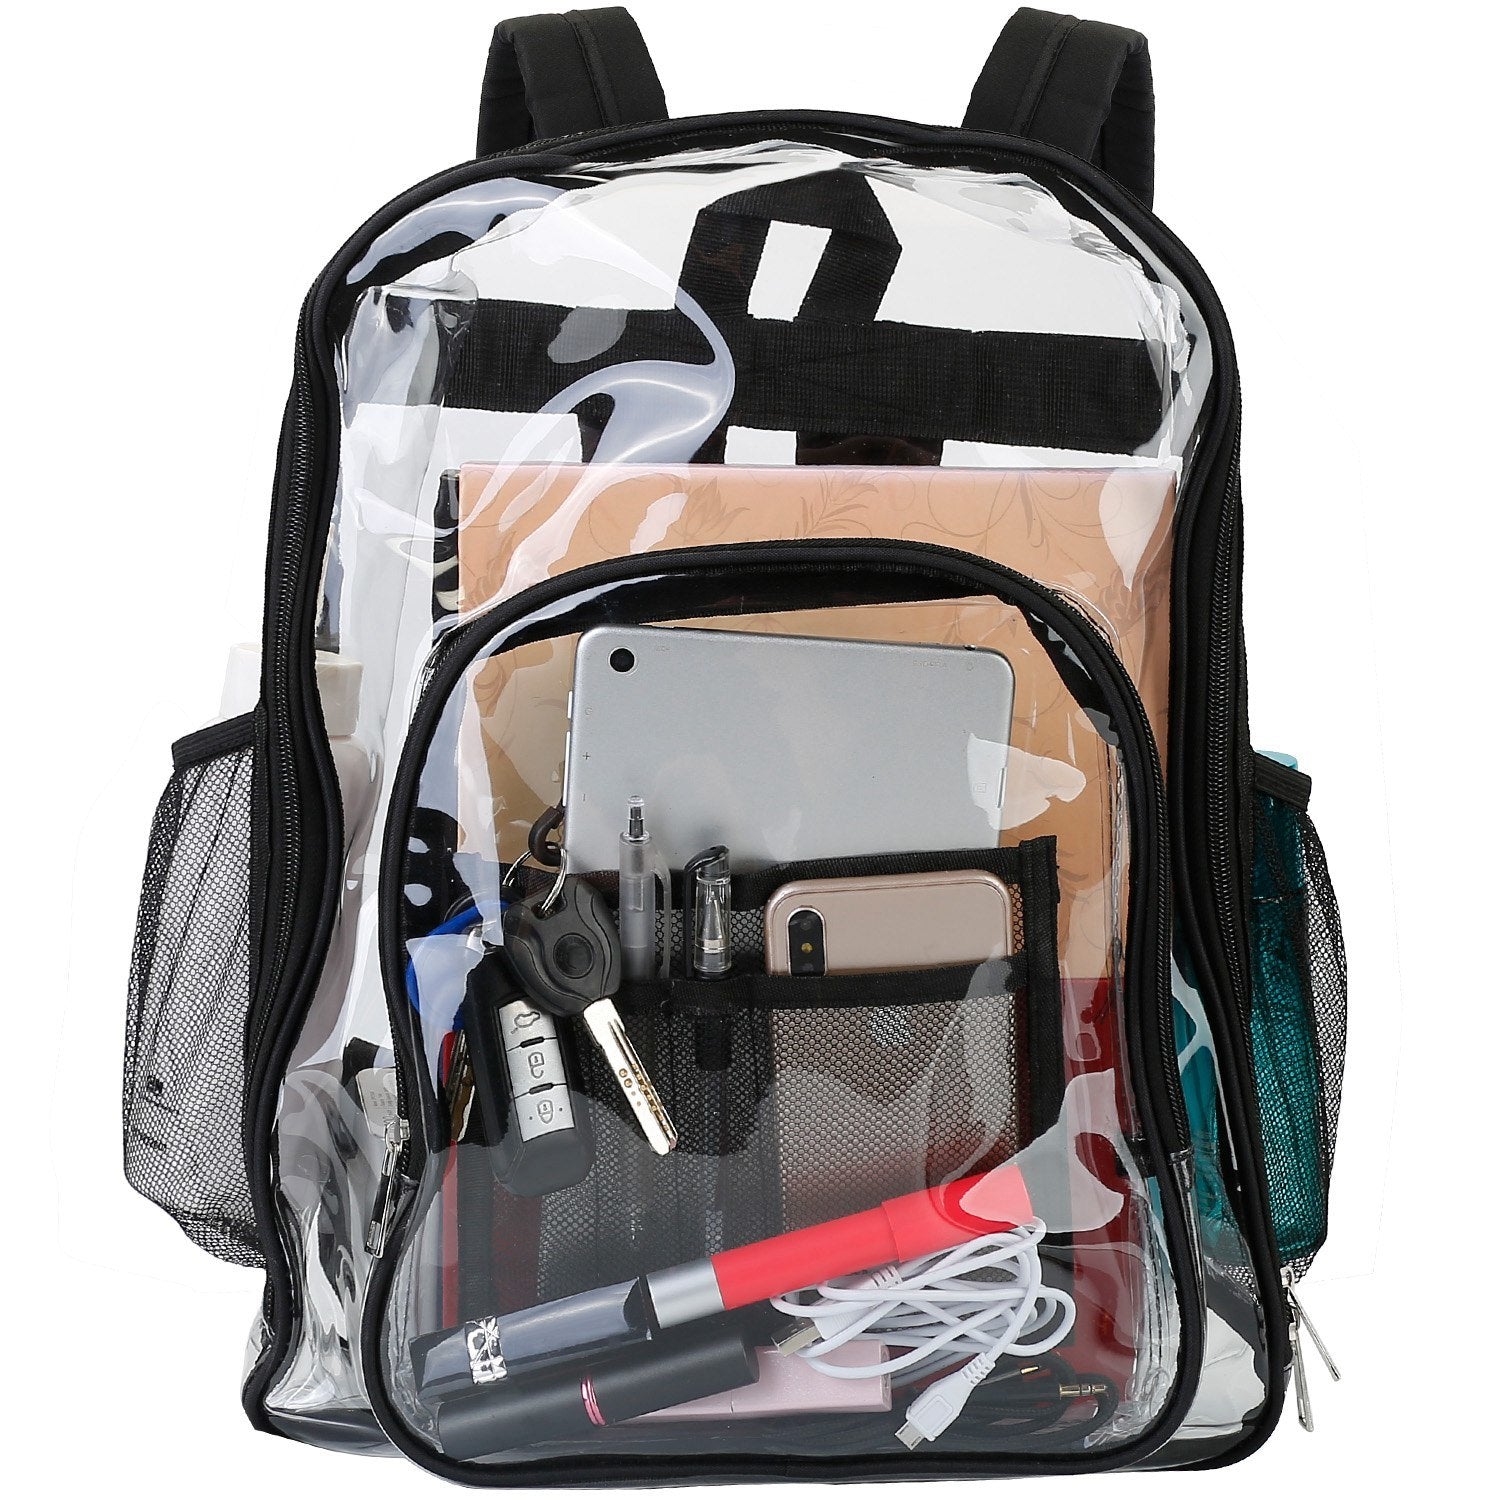 A Clear Backpack Heavy Duty Transparent Book Bag Waterproof PVC Clear Backpack 5.3Gal with Reinforced Strap with adjustable padded straps and spacious compartments, perfect for carrying a lot of items.